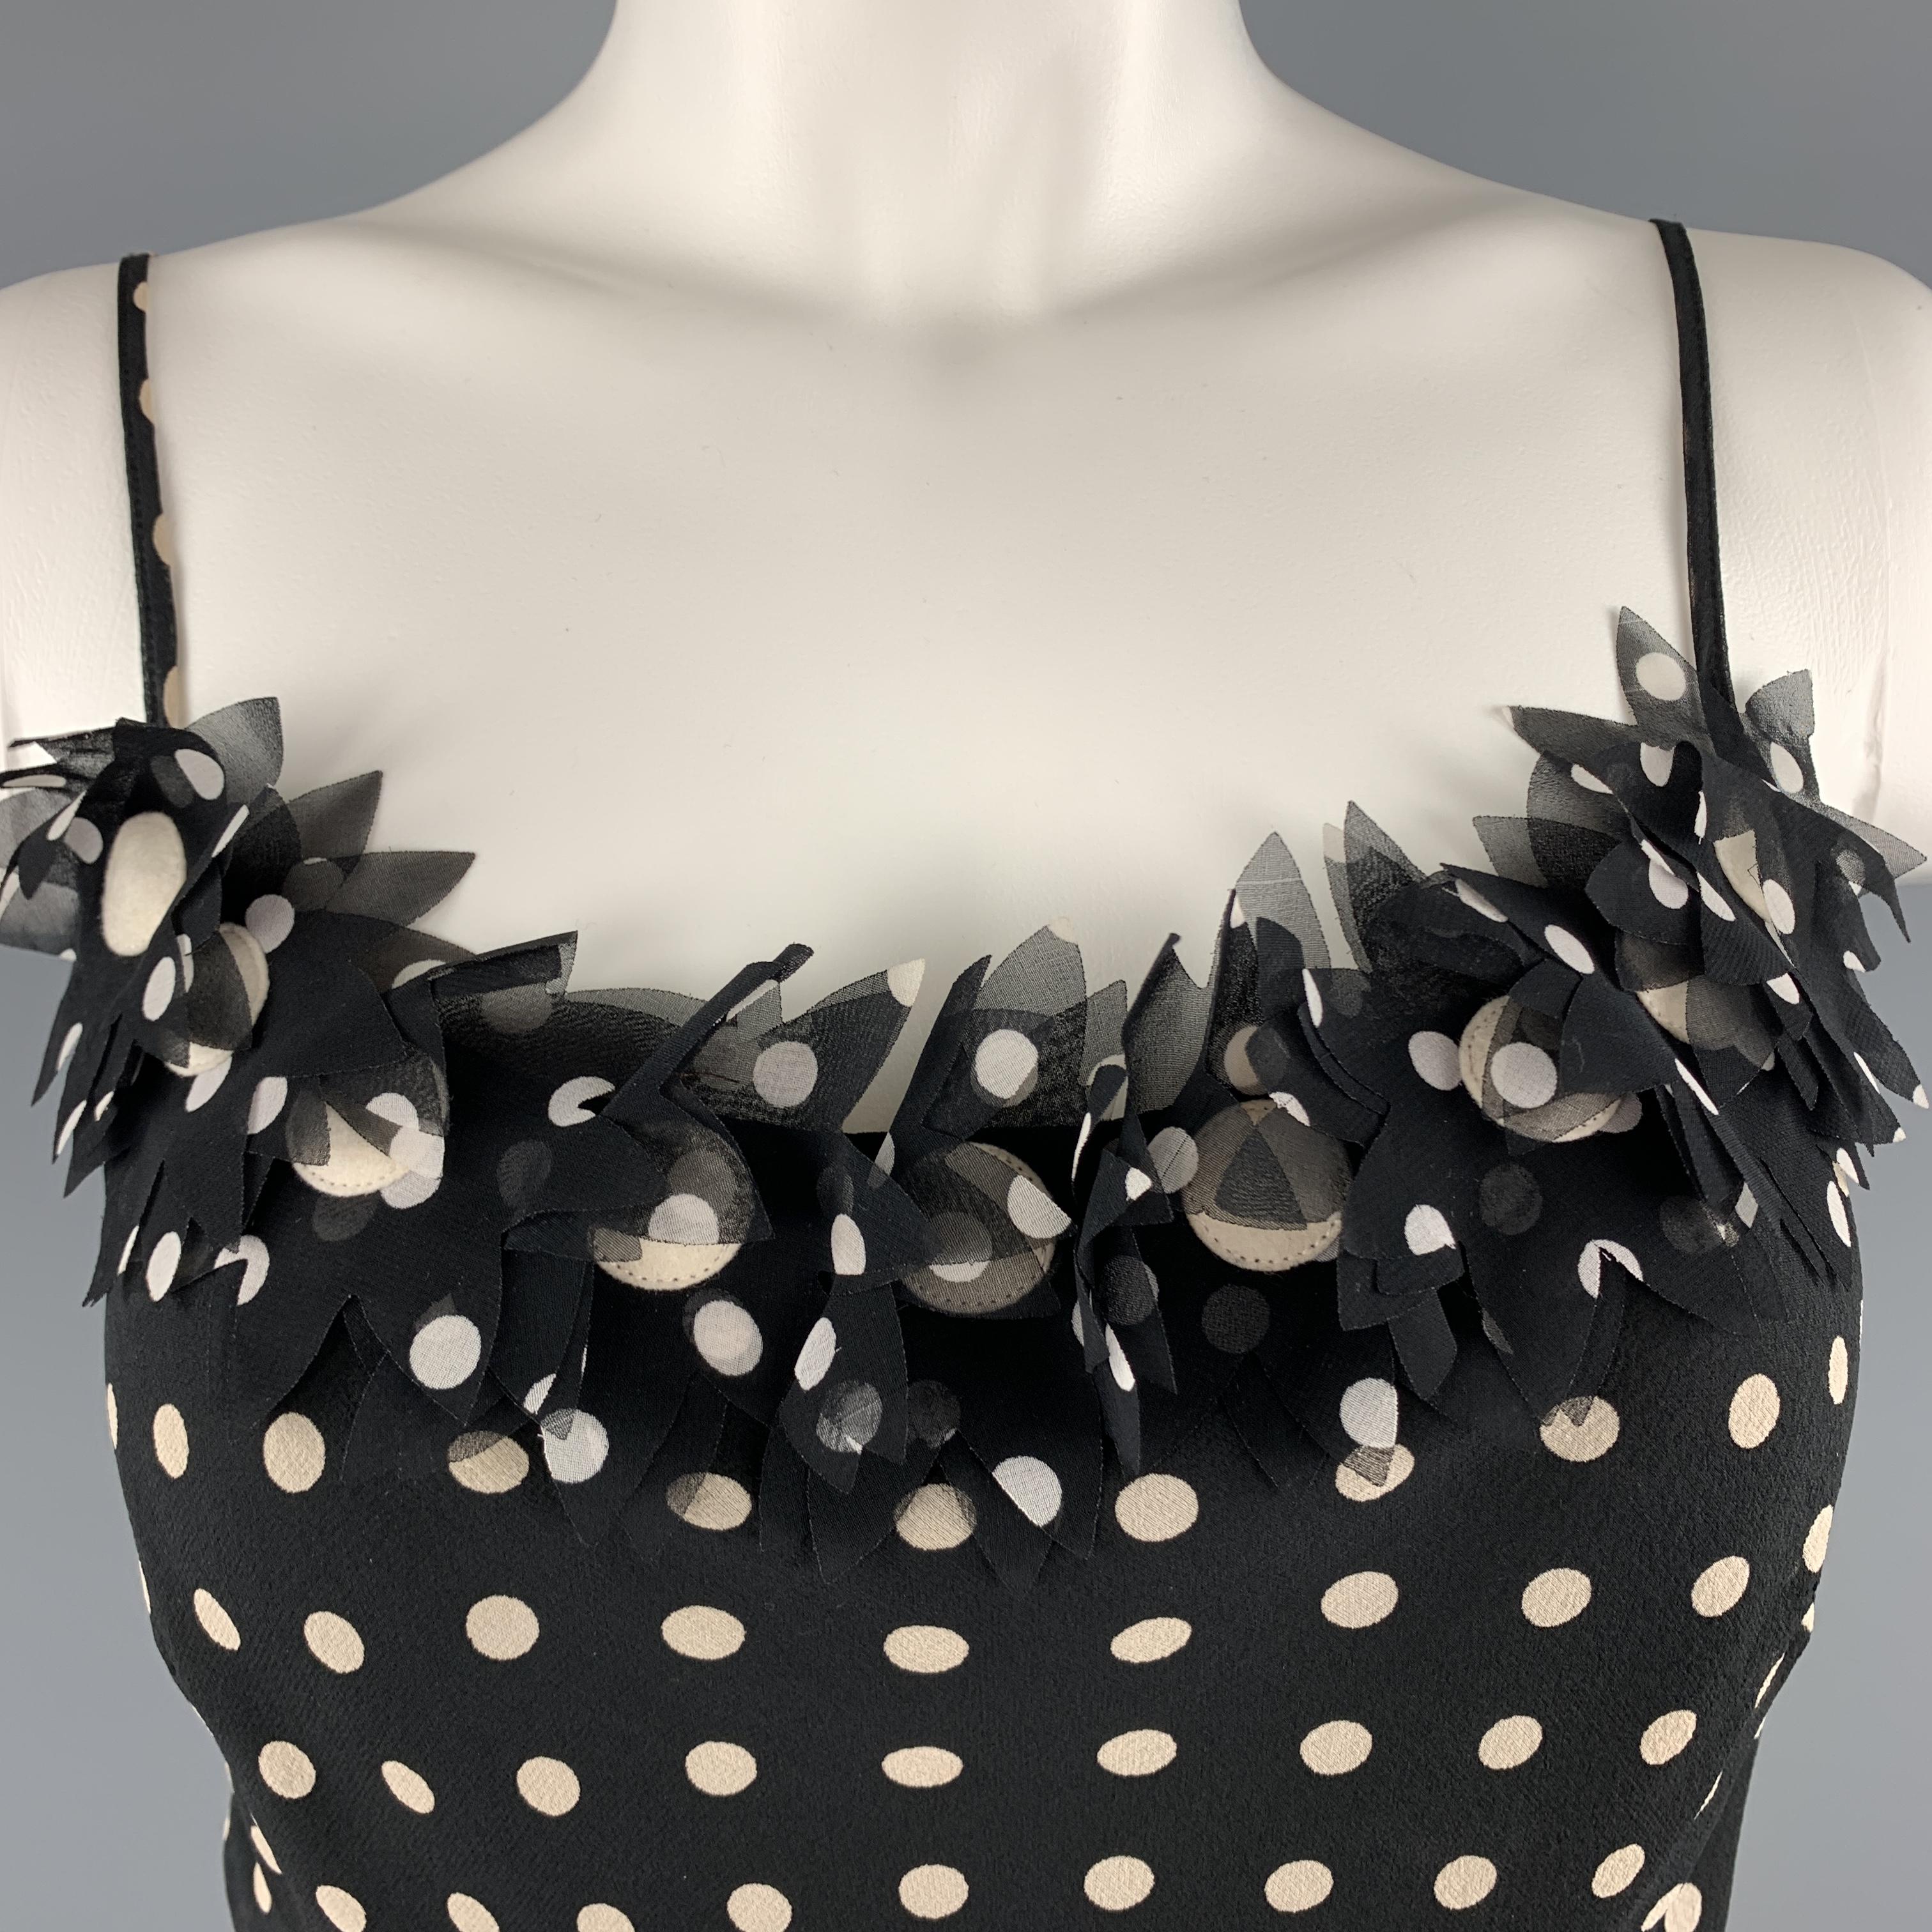 MOSCHINO CHEAP AND CHIC camisole comes in black and cream polka dot silk with skinny straps and floral appliques. Cardigan jacket available separately. Made in Italy.

Excellent Pre-Owned Condition.
Marked: 6

Measurements:

Shoulder: 11 in.
Bust: